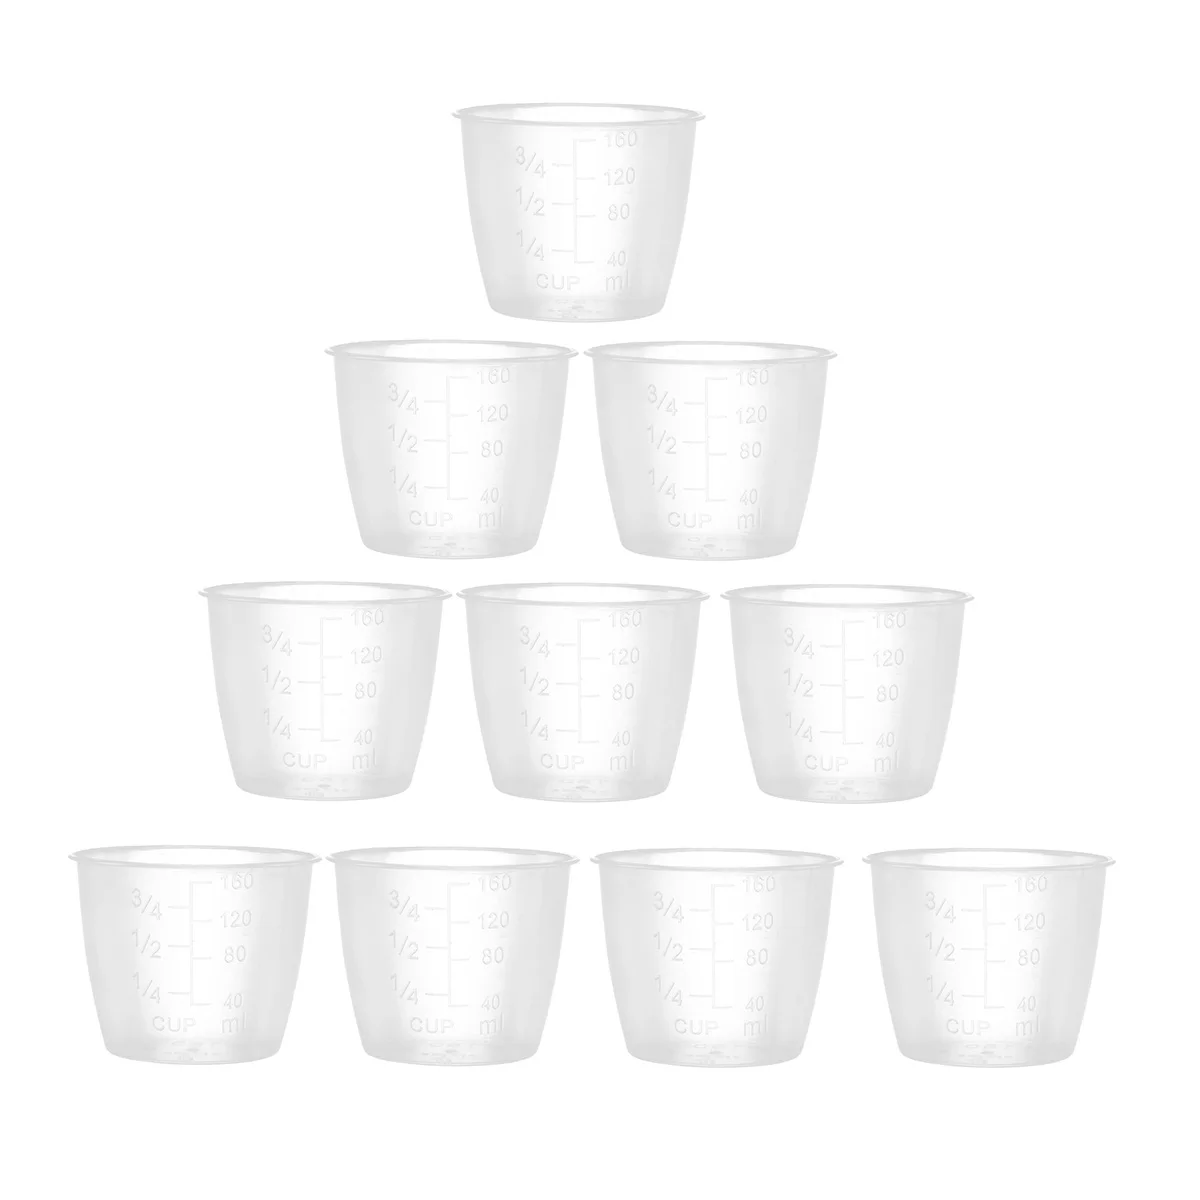 LLERRA 5 Pack 160 ml Rice Measuring Cup, Clear Rice Cooker Cup, Measuring Cup for Rice and Dry Ingredient, Rice Cup Replacement